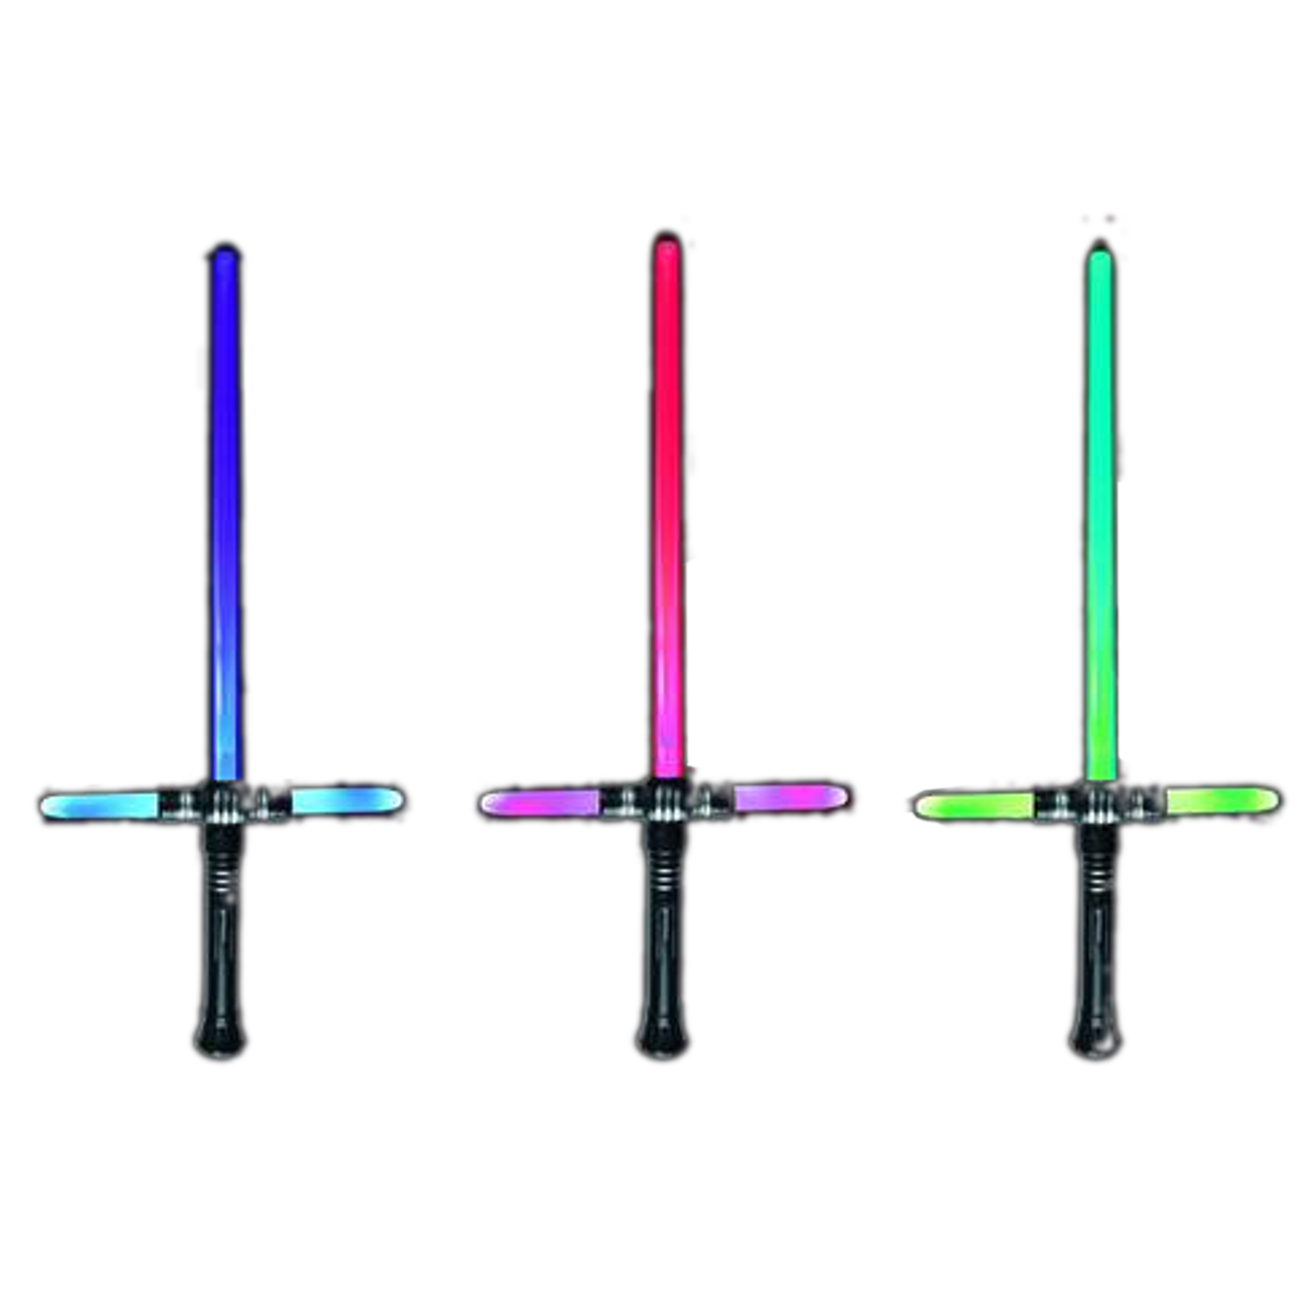 Star Wars Cross Guard Lightsabers Multicolor All Products 3